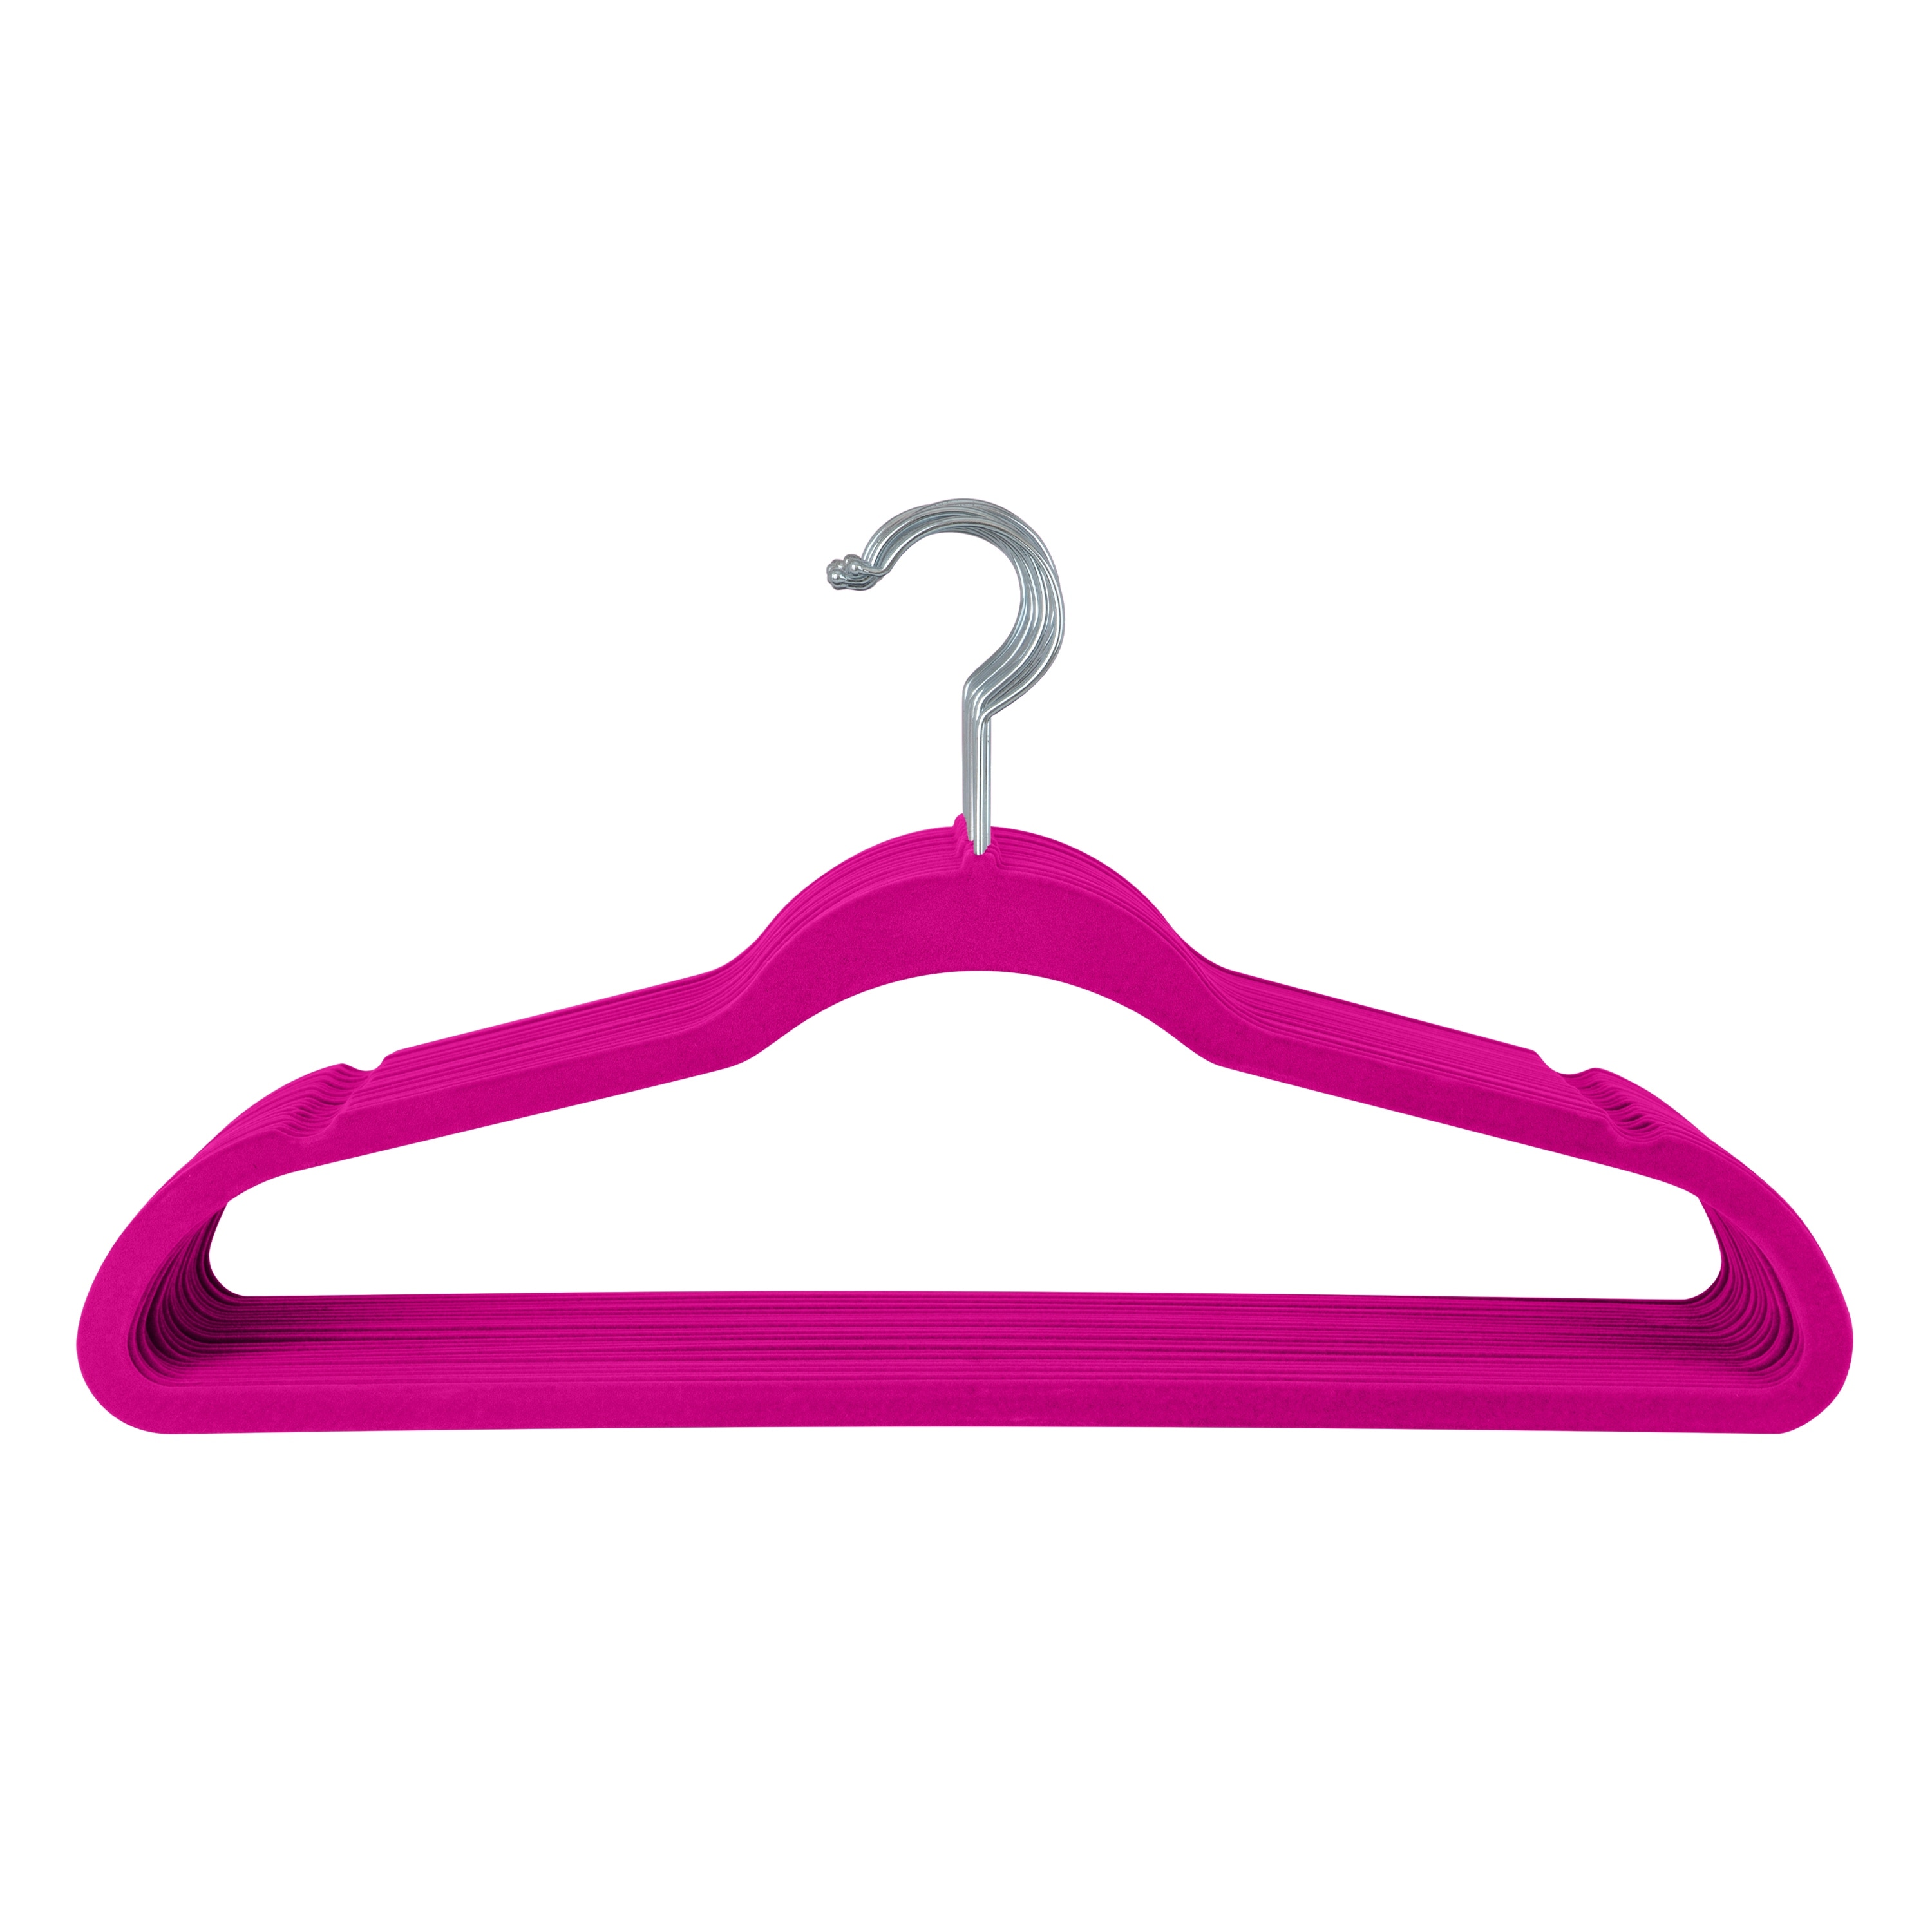 https://ak1.ostkcdn.com/images/products/is/images/direct/e7cb0dd0baad5384c2257a1053b8ee579b05c20e/Simplify-25-Pack-Slim-Velvet-Suit-Hangers-in-Fuchsia.jpg